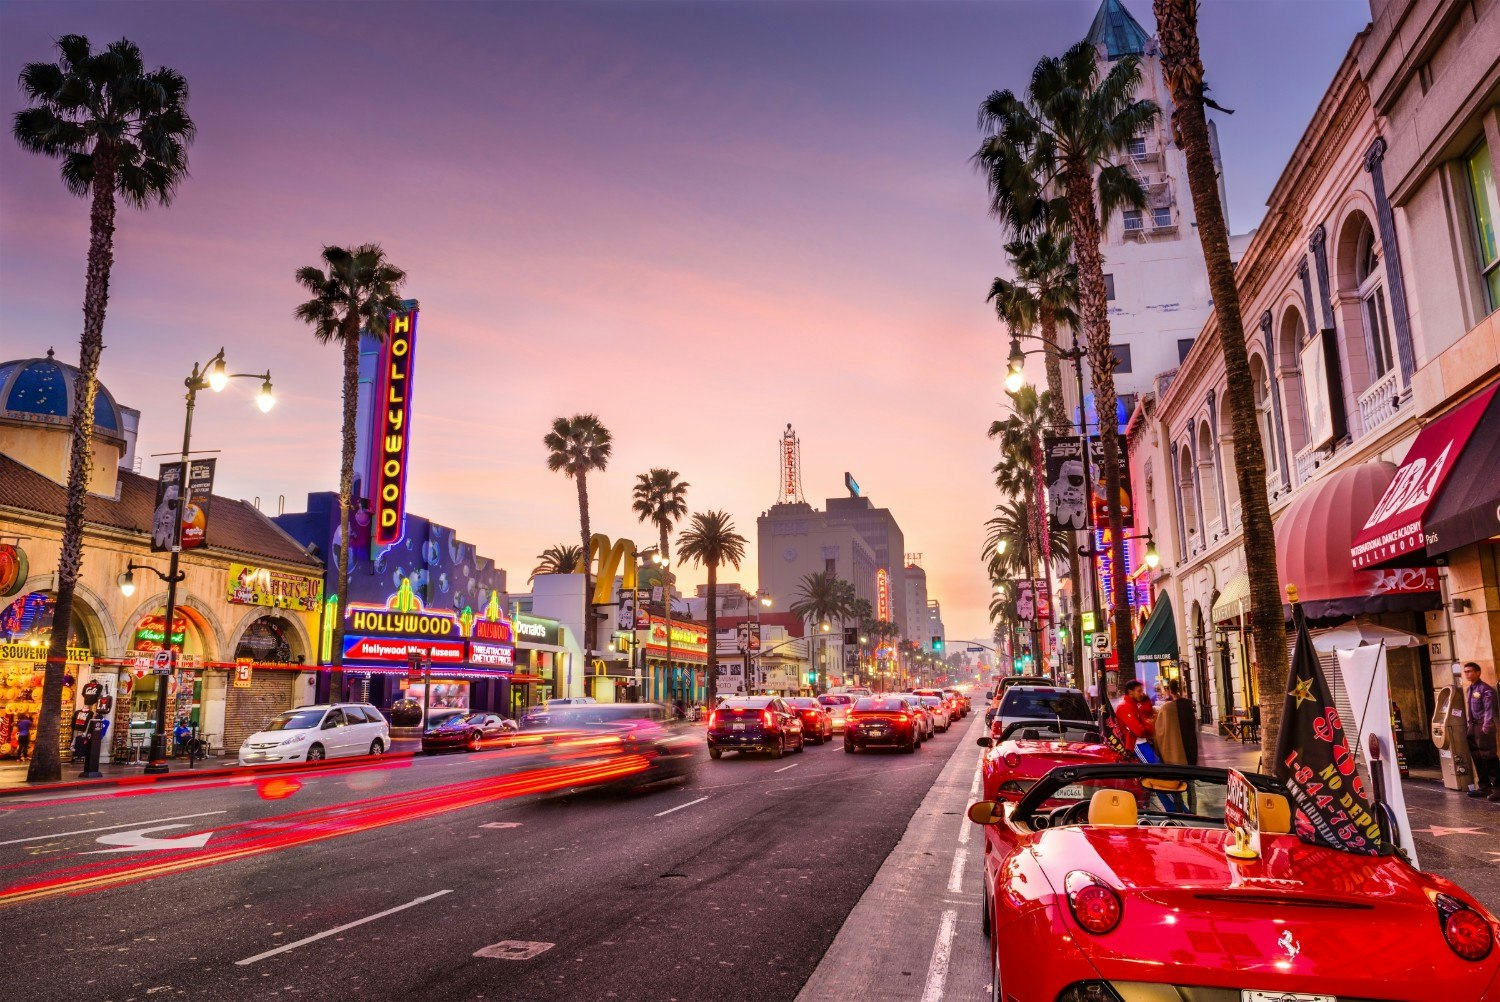 A twilight view of streets in Hollywood, Los Angeles